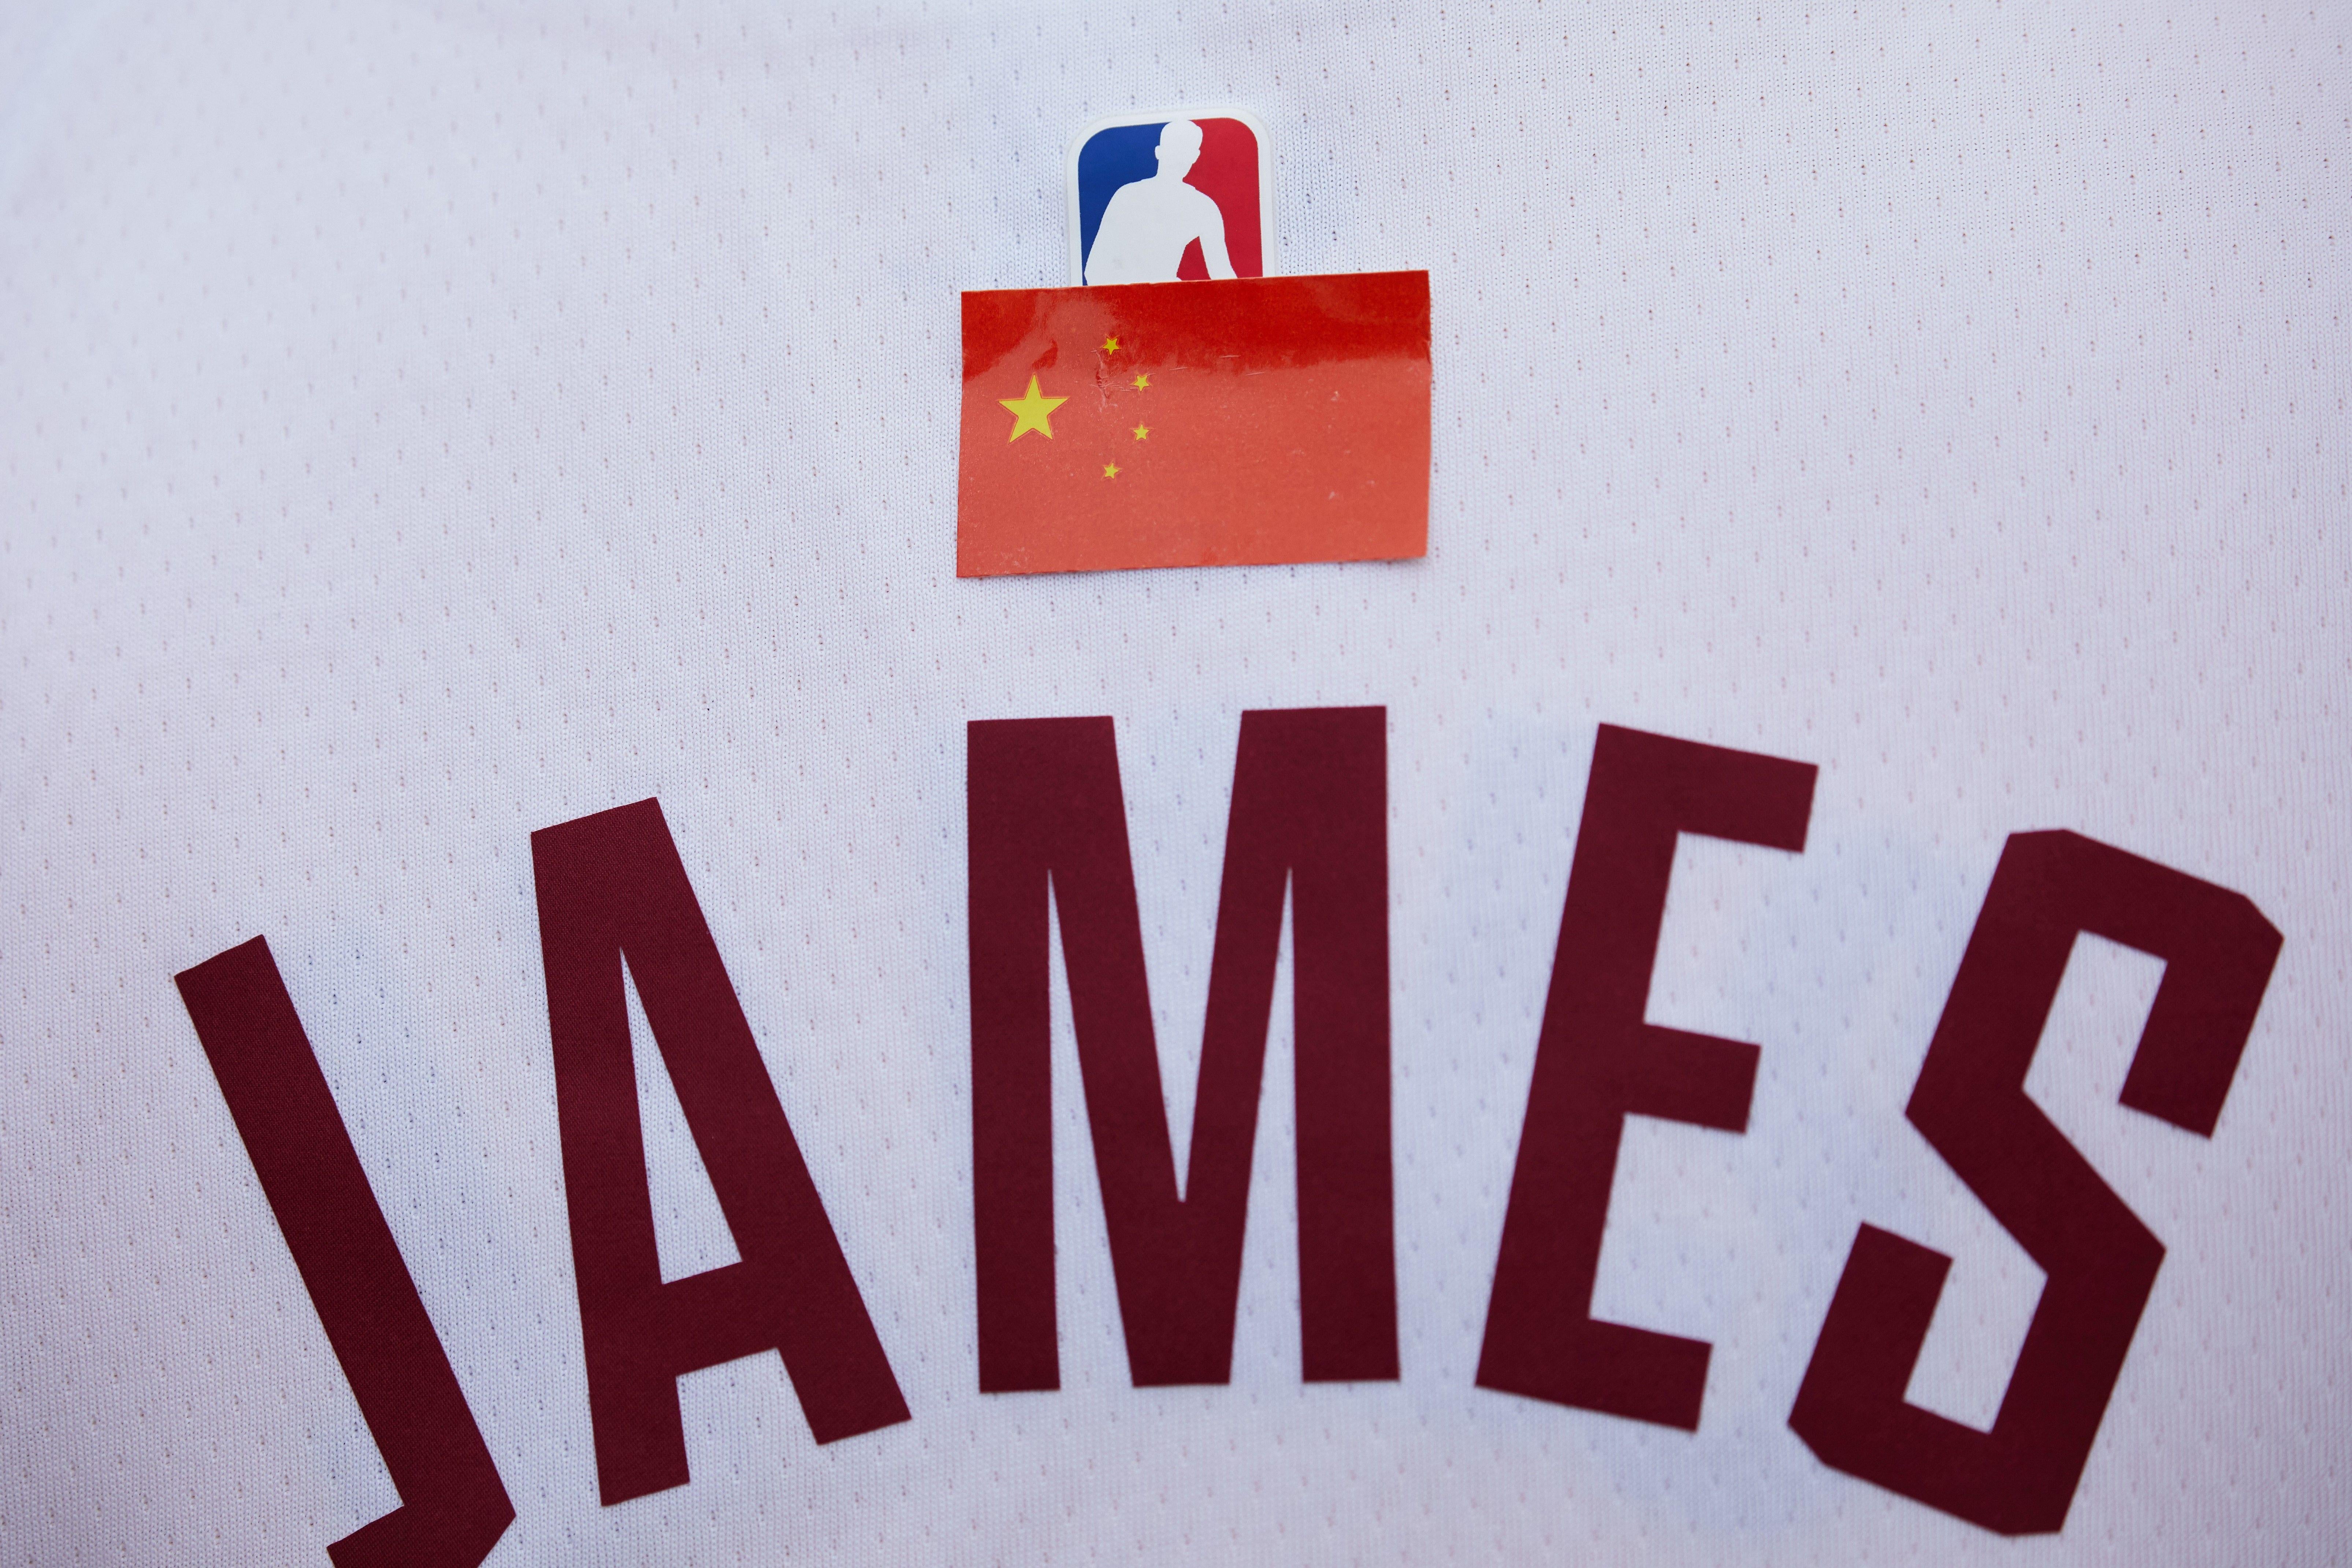 Close-up of the Chinese flag sticker over the NBA logo above the JAMES on a LeBron James jersey.